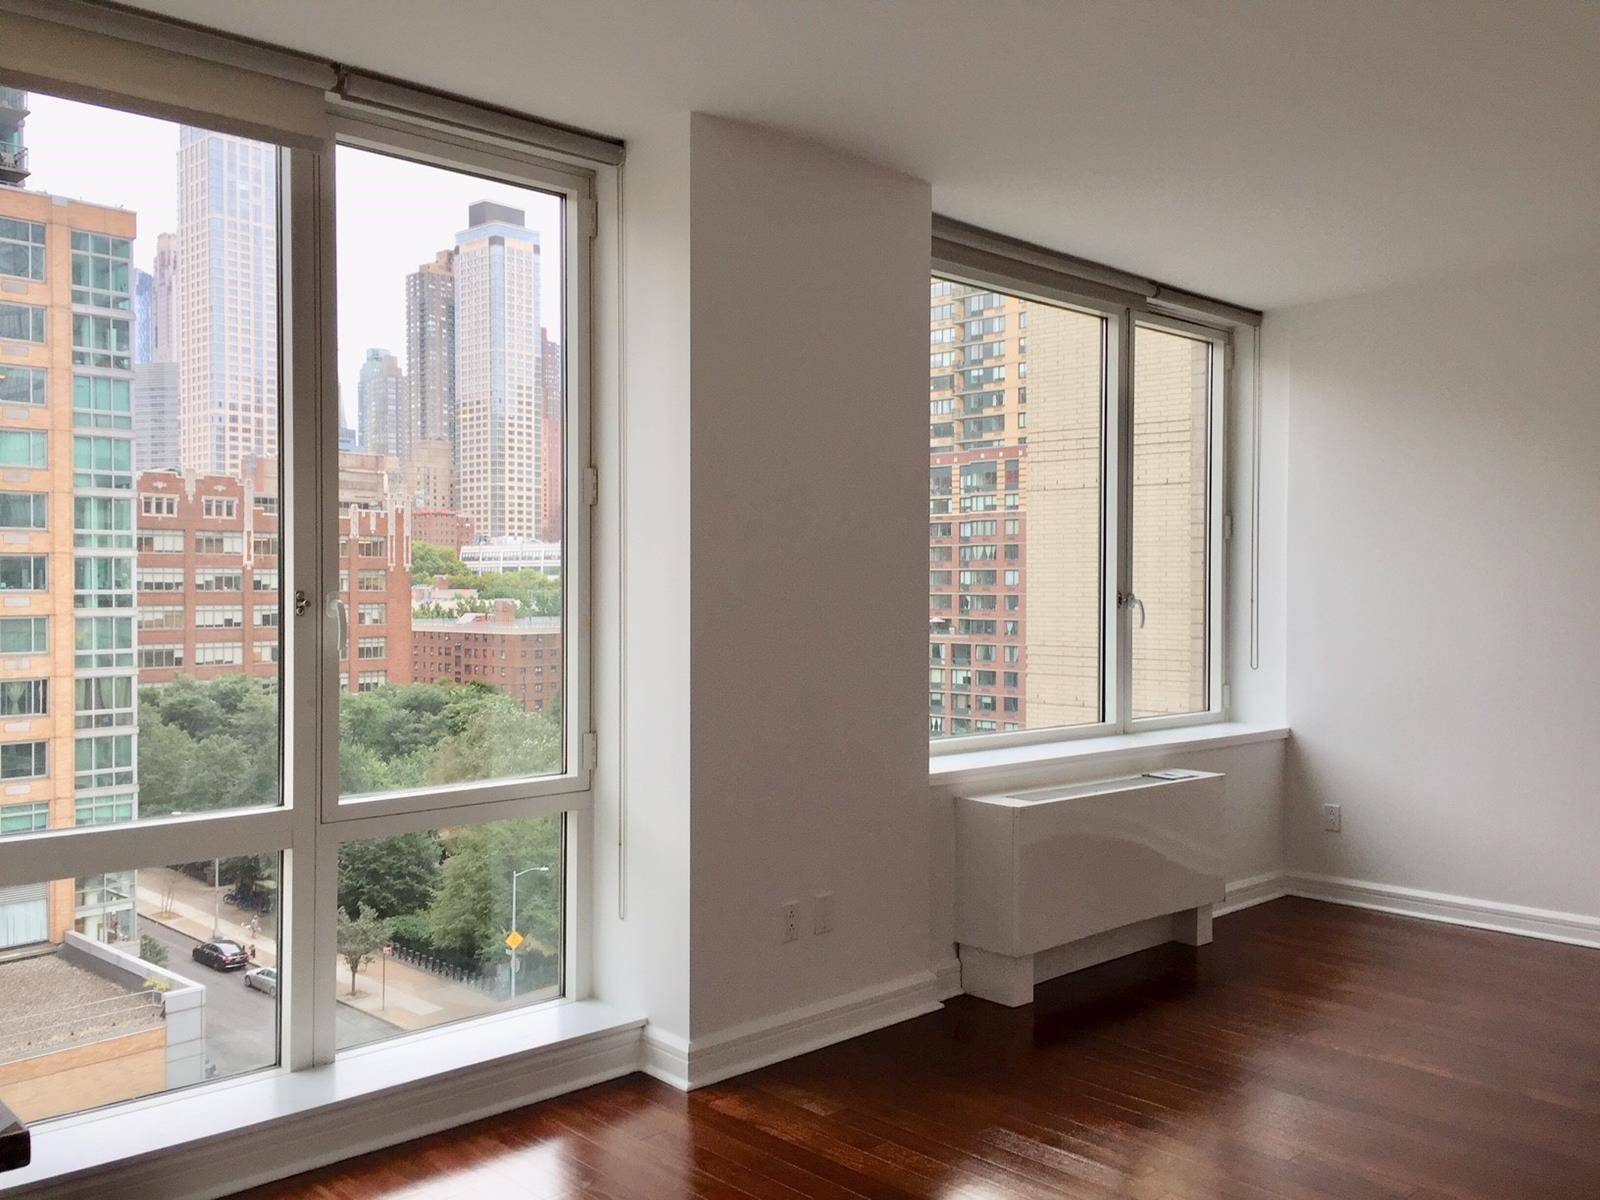 Move in to this beautiful, spacious one bedroom apartment featuring floor to ceiling windows and hardwood floors throughout.